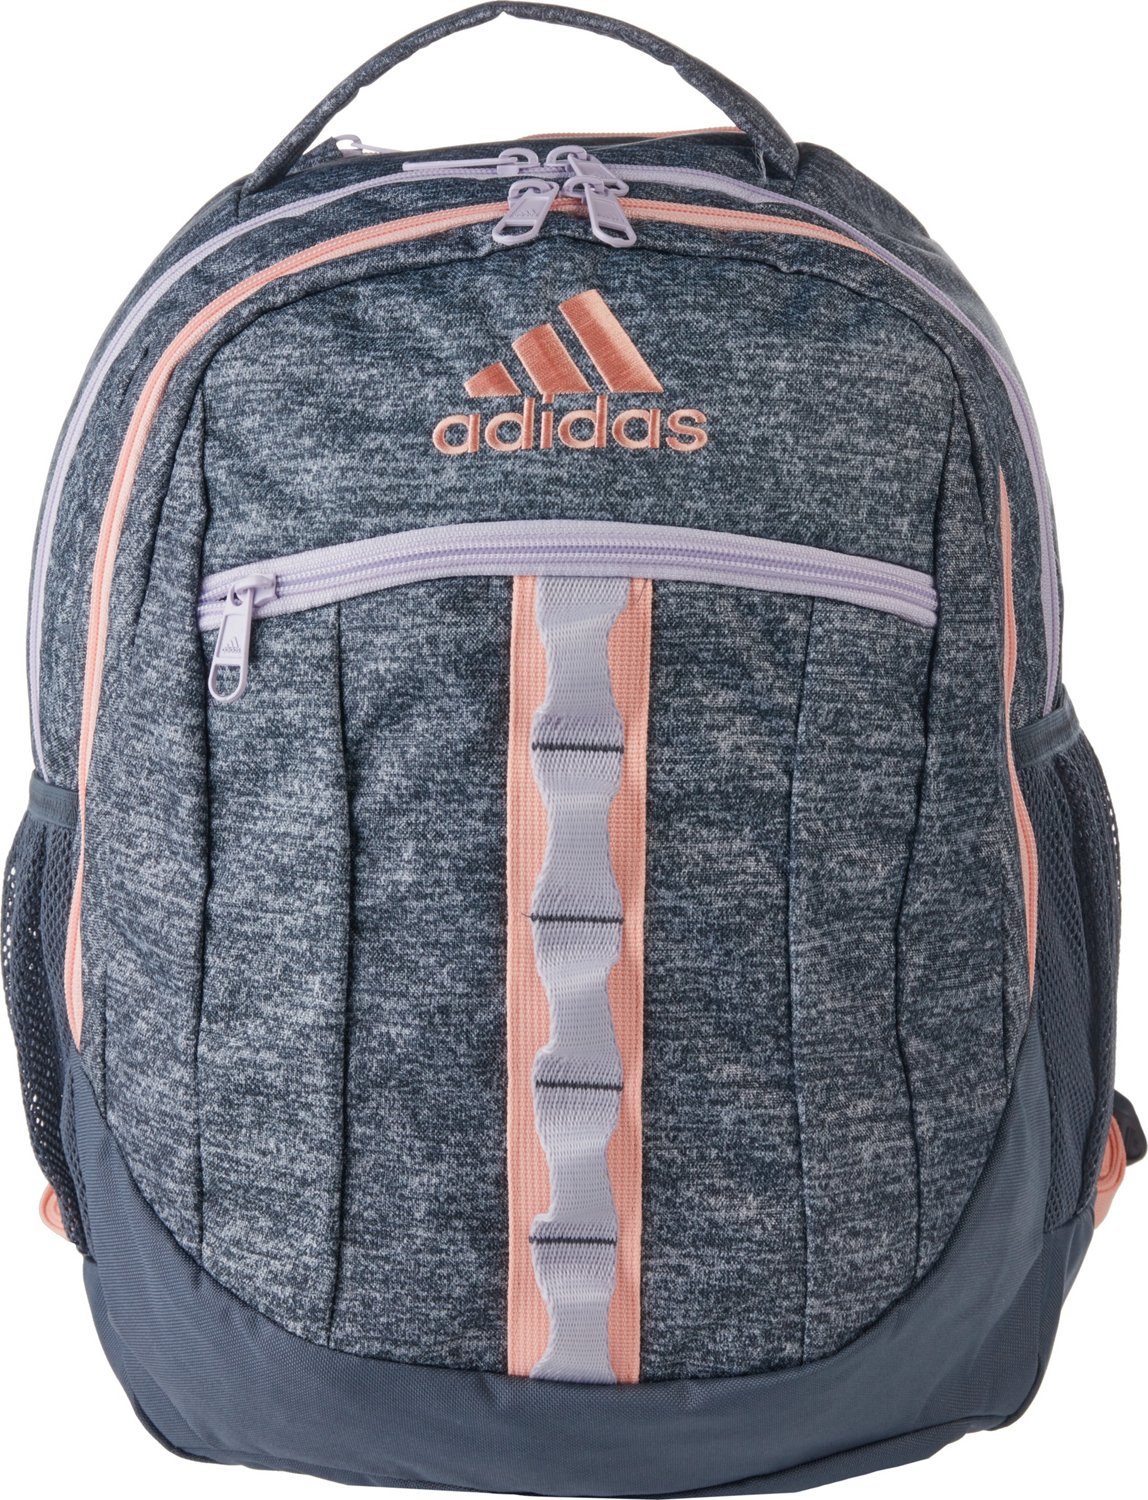 adidas backpack s